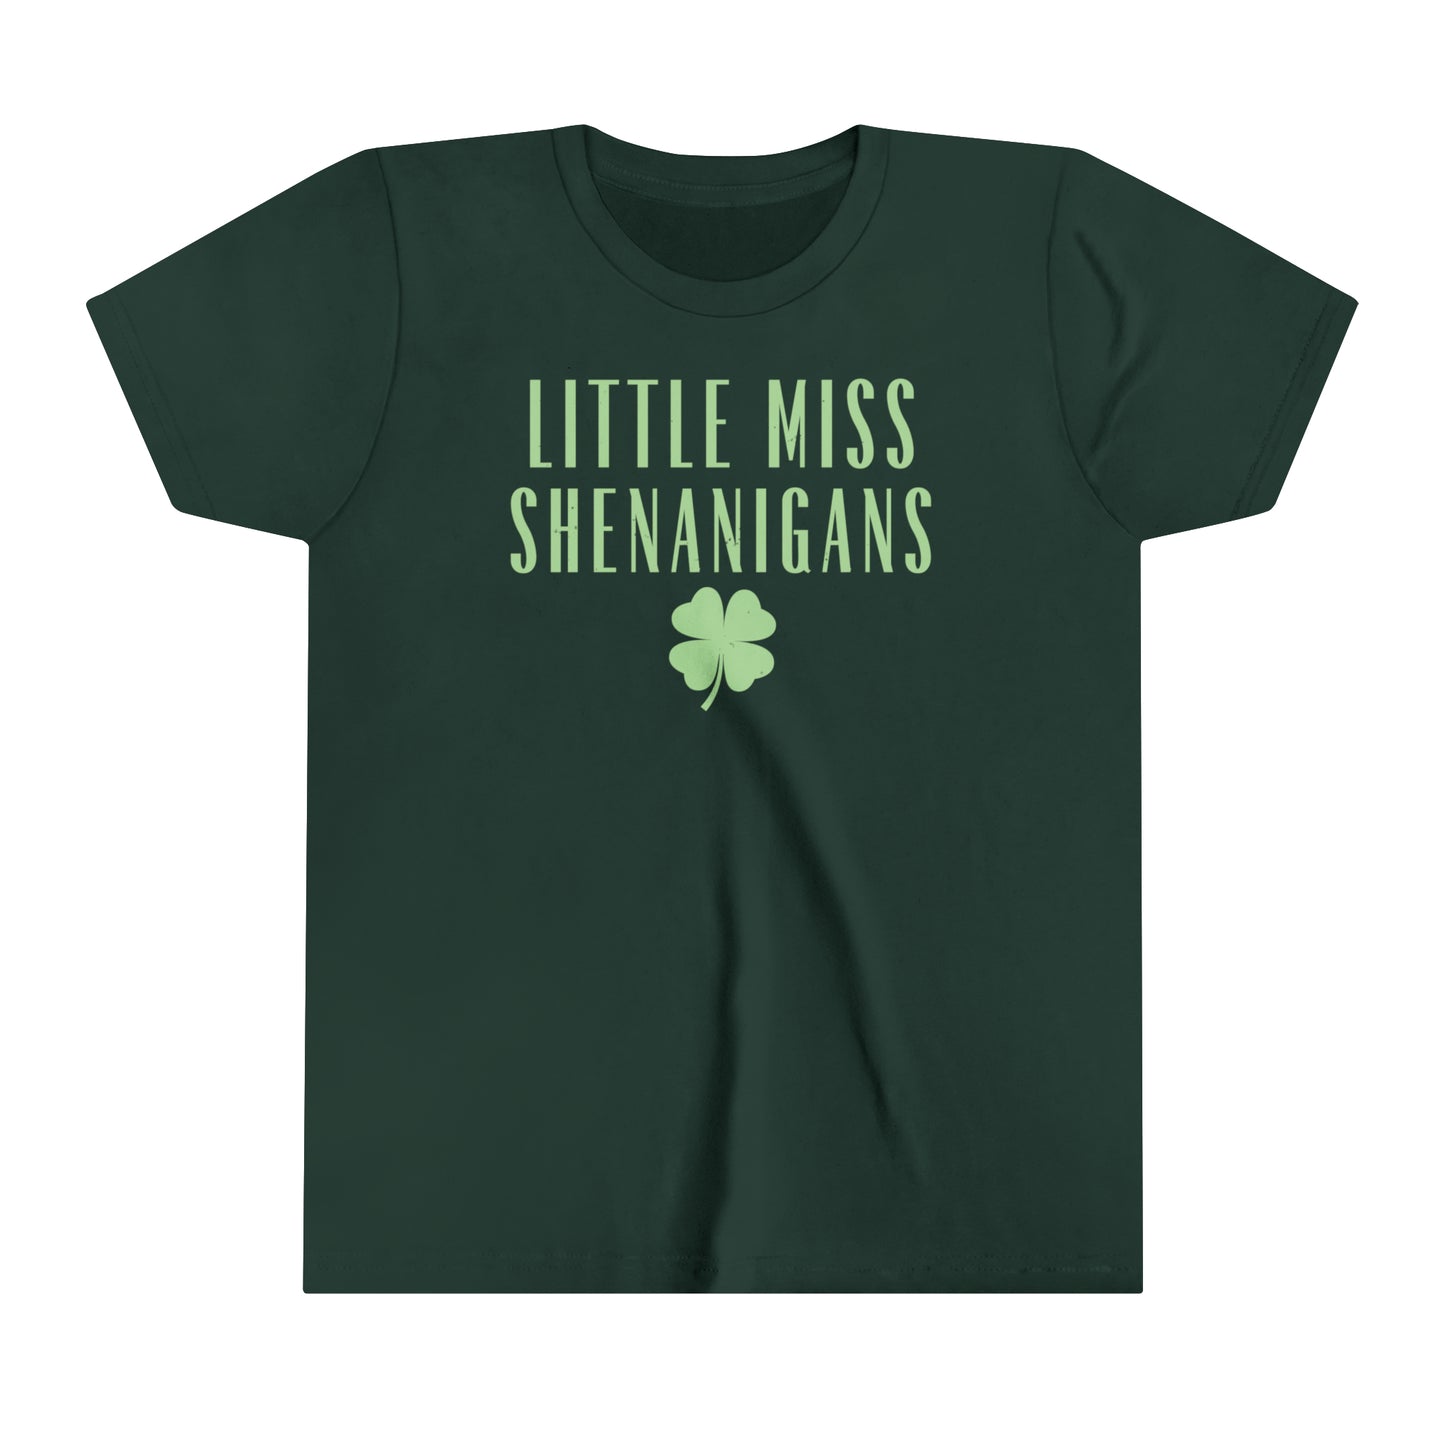 Little Miss Shenanigans - Youth Jersey Short Sleeve Tee